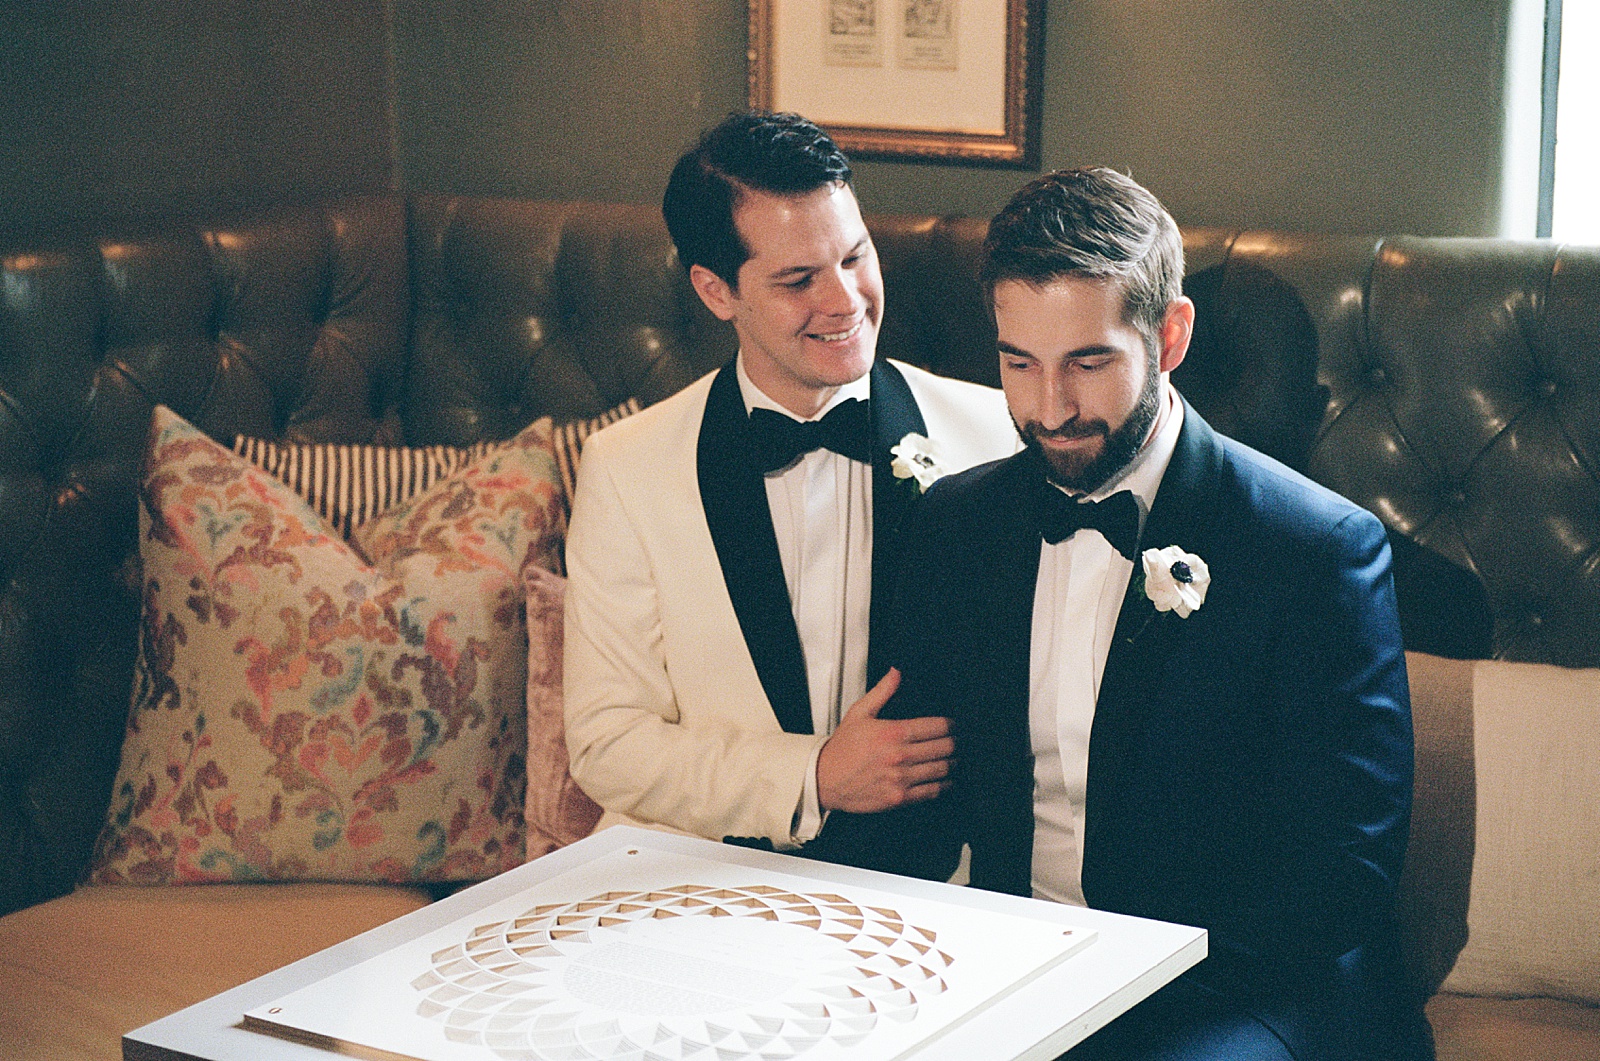 Two grooms sit next to each other on a couch looking at their ketubah.